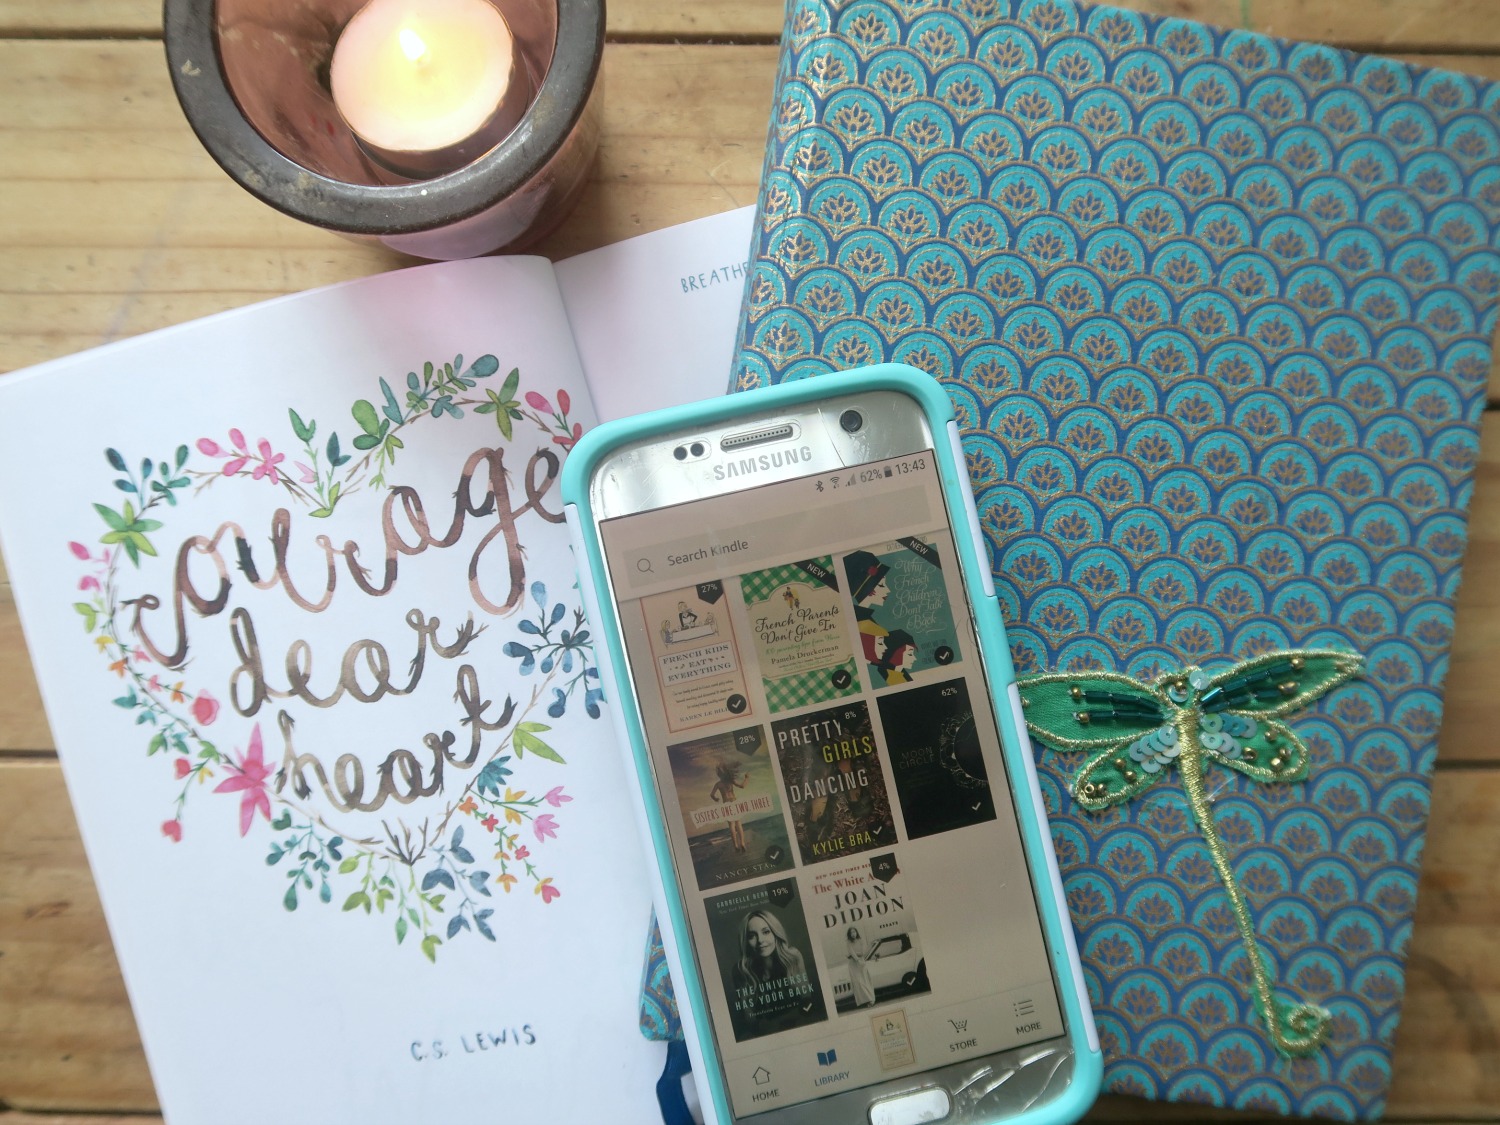 My favourite eight self-care apps